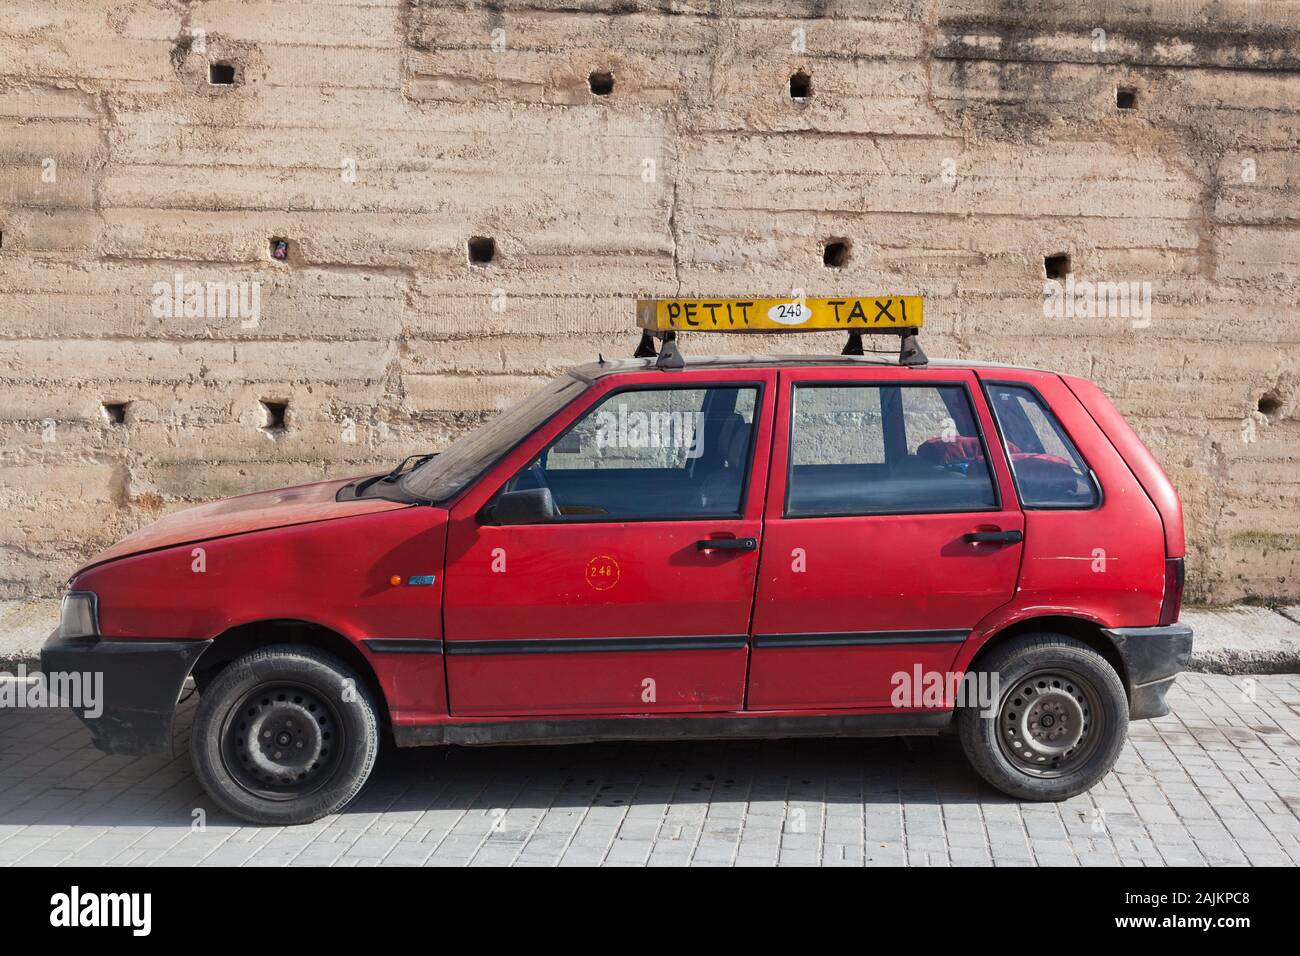 Red car with the yellow sign “PETIT TAXI”, Fes (Fez), Morocco Stock Photo